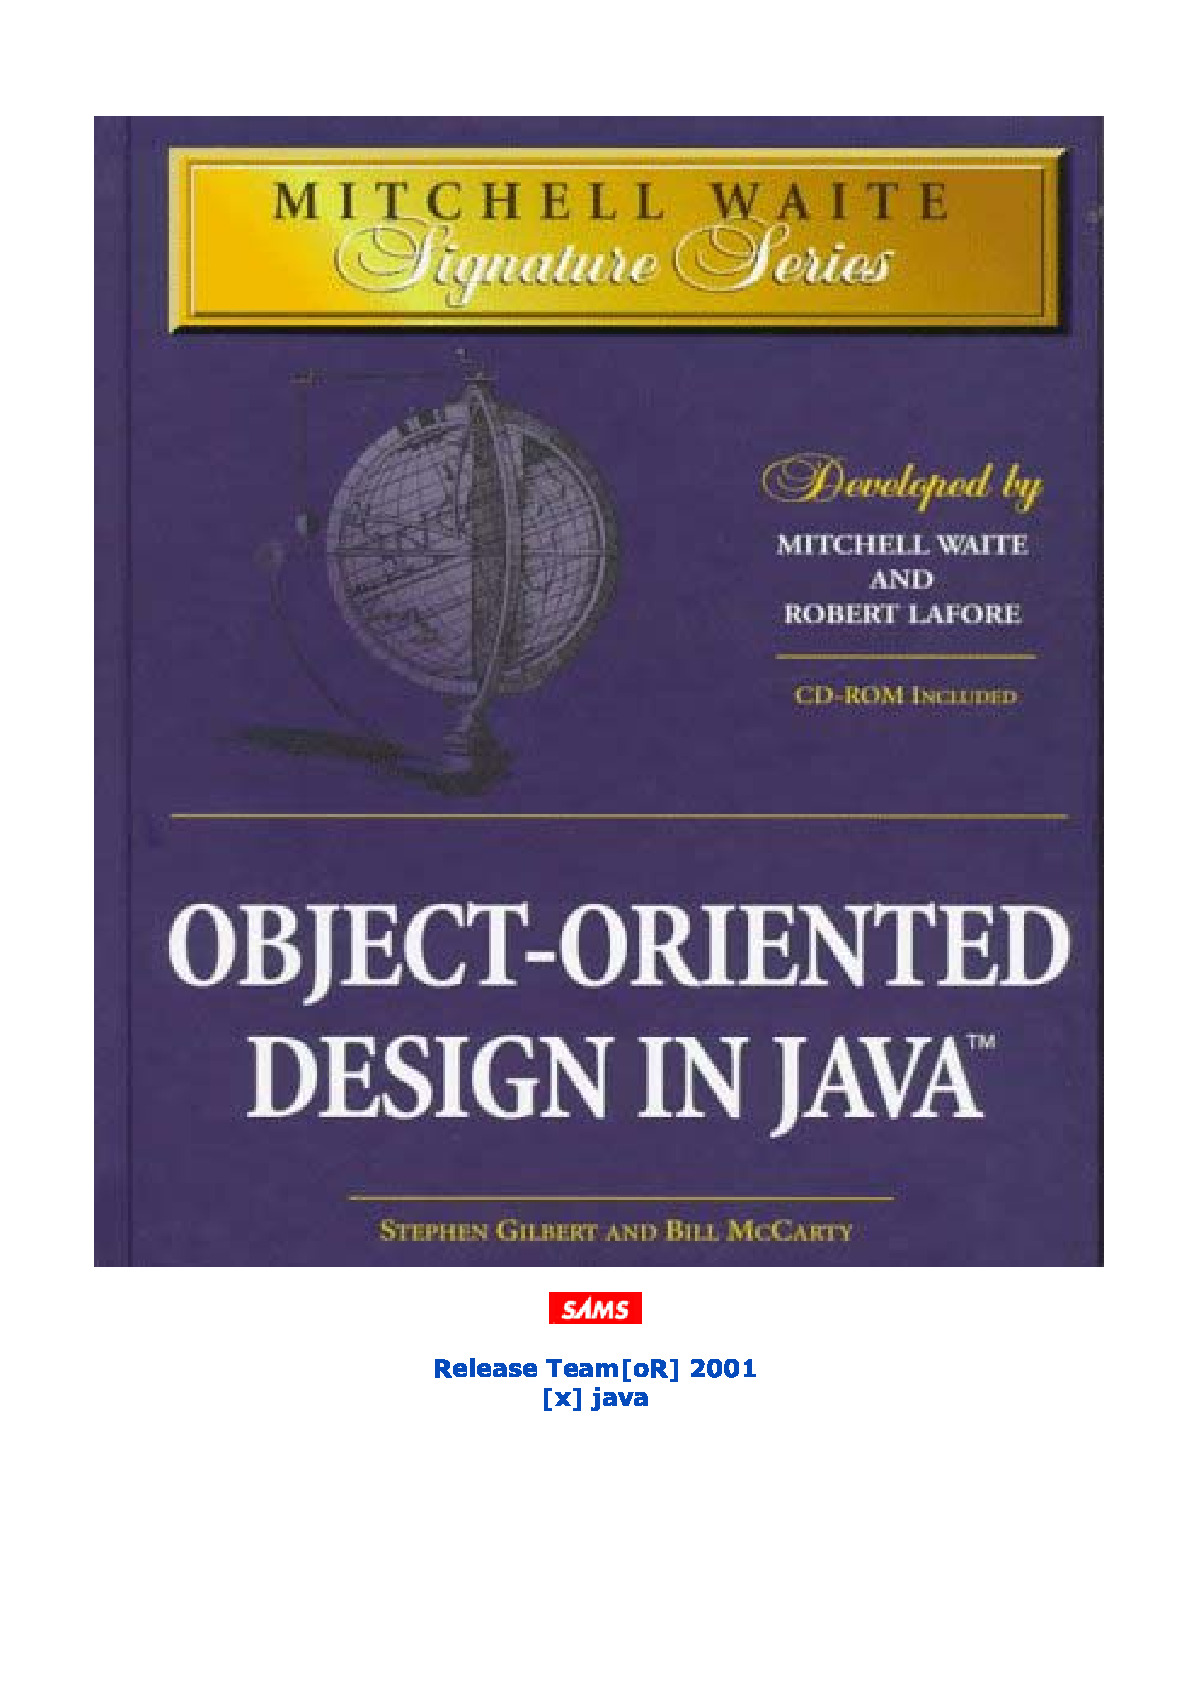 [JAVA][Object-Oriented Design in Java]